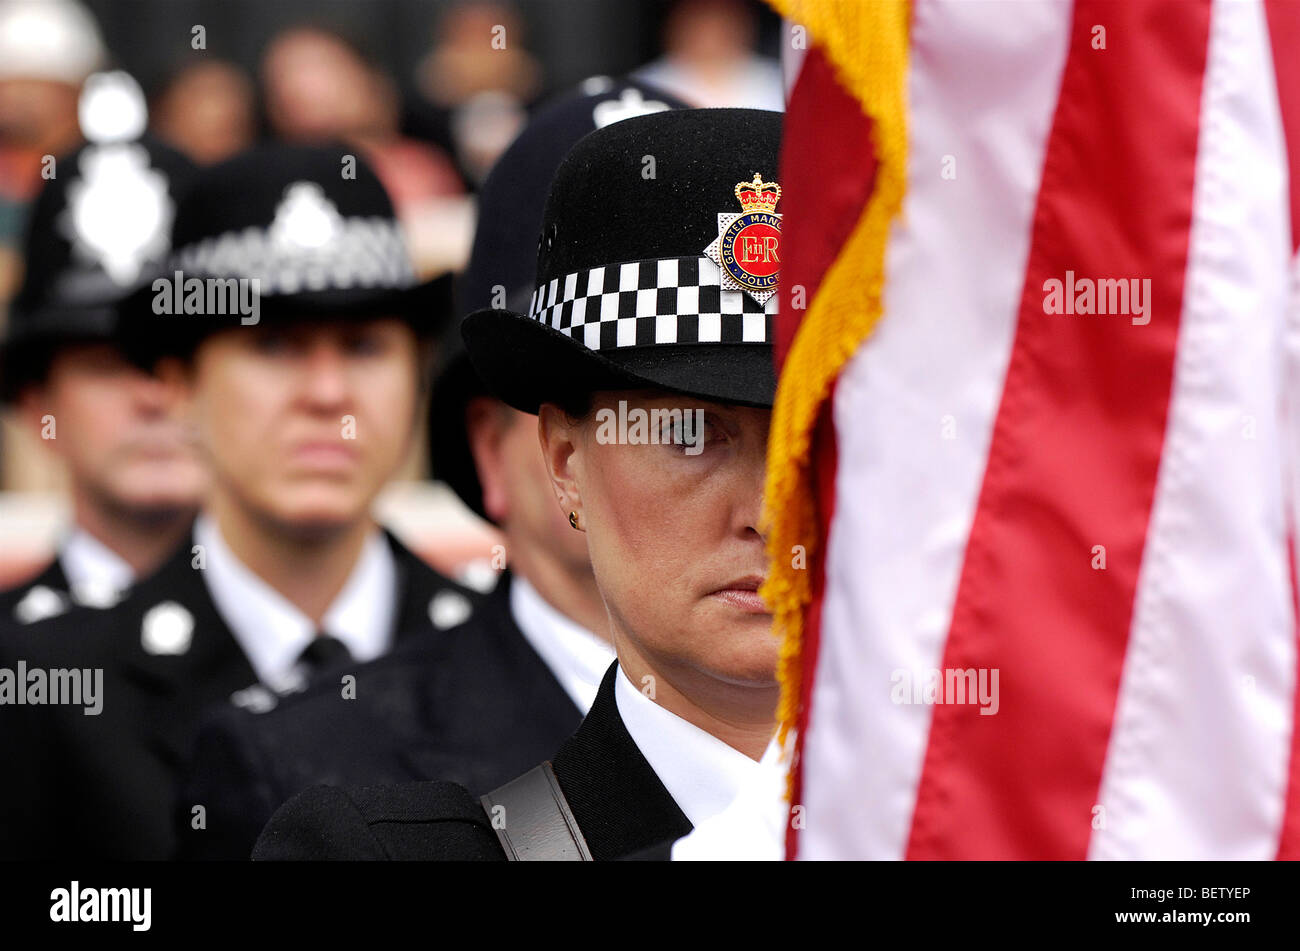 A delegation of police officers attend the 2007 Word Trade Center memorial service in New York. Stock Photo